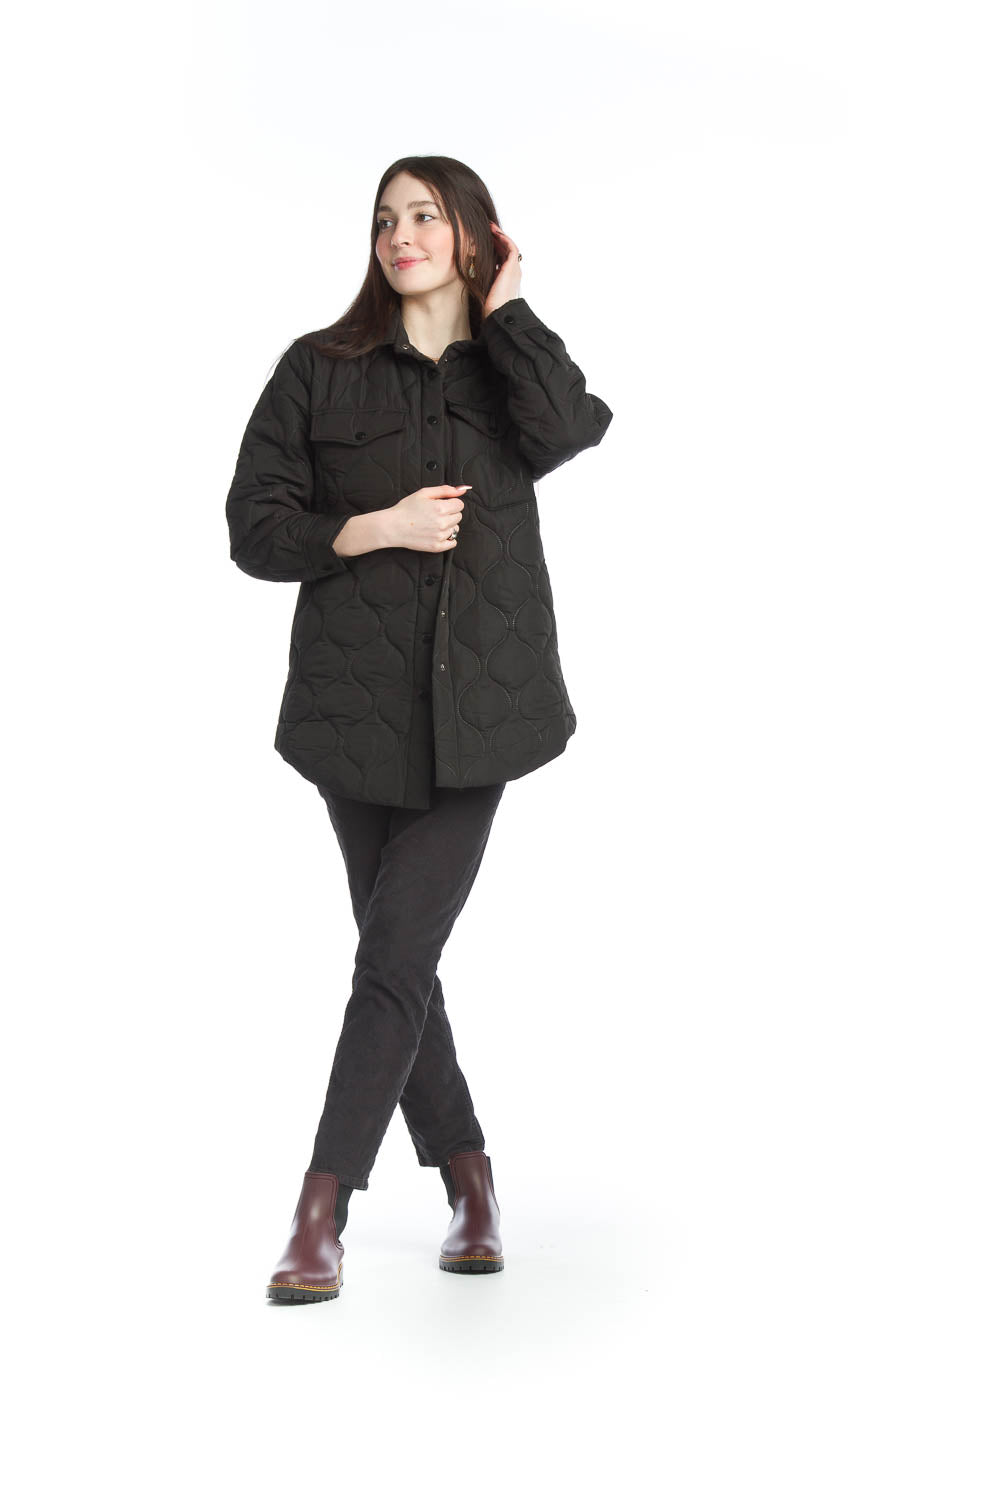 Papillon JT13744 Quilted Shacket with Pockets in Black